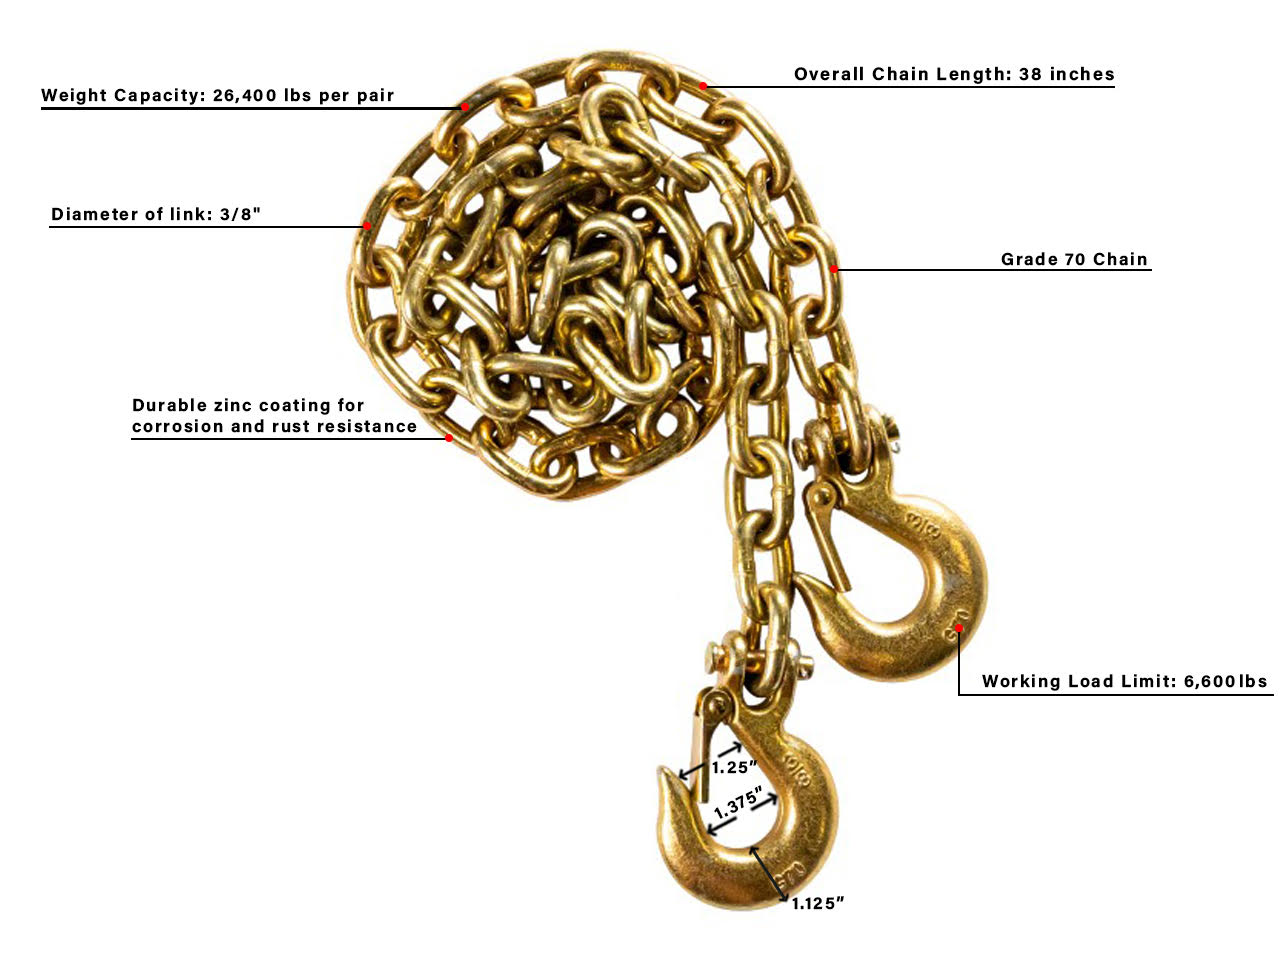 BulletProof Heavy Duty 3/8" Safety Chains (Pair) Design Specification